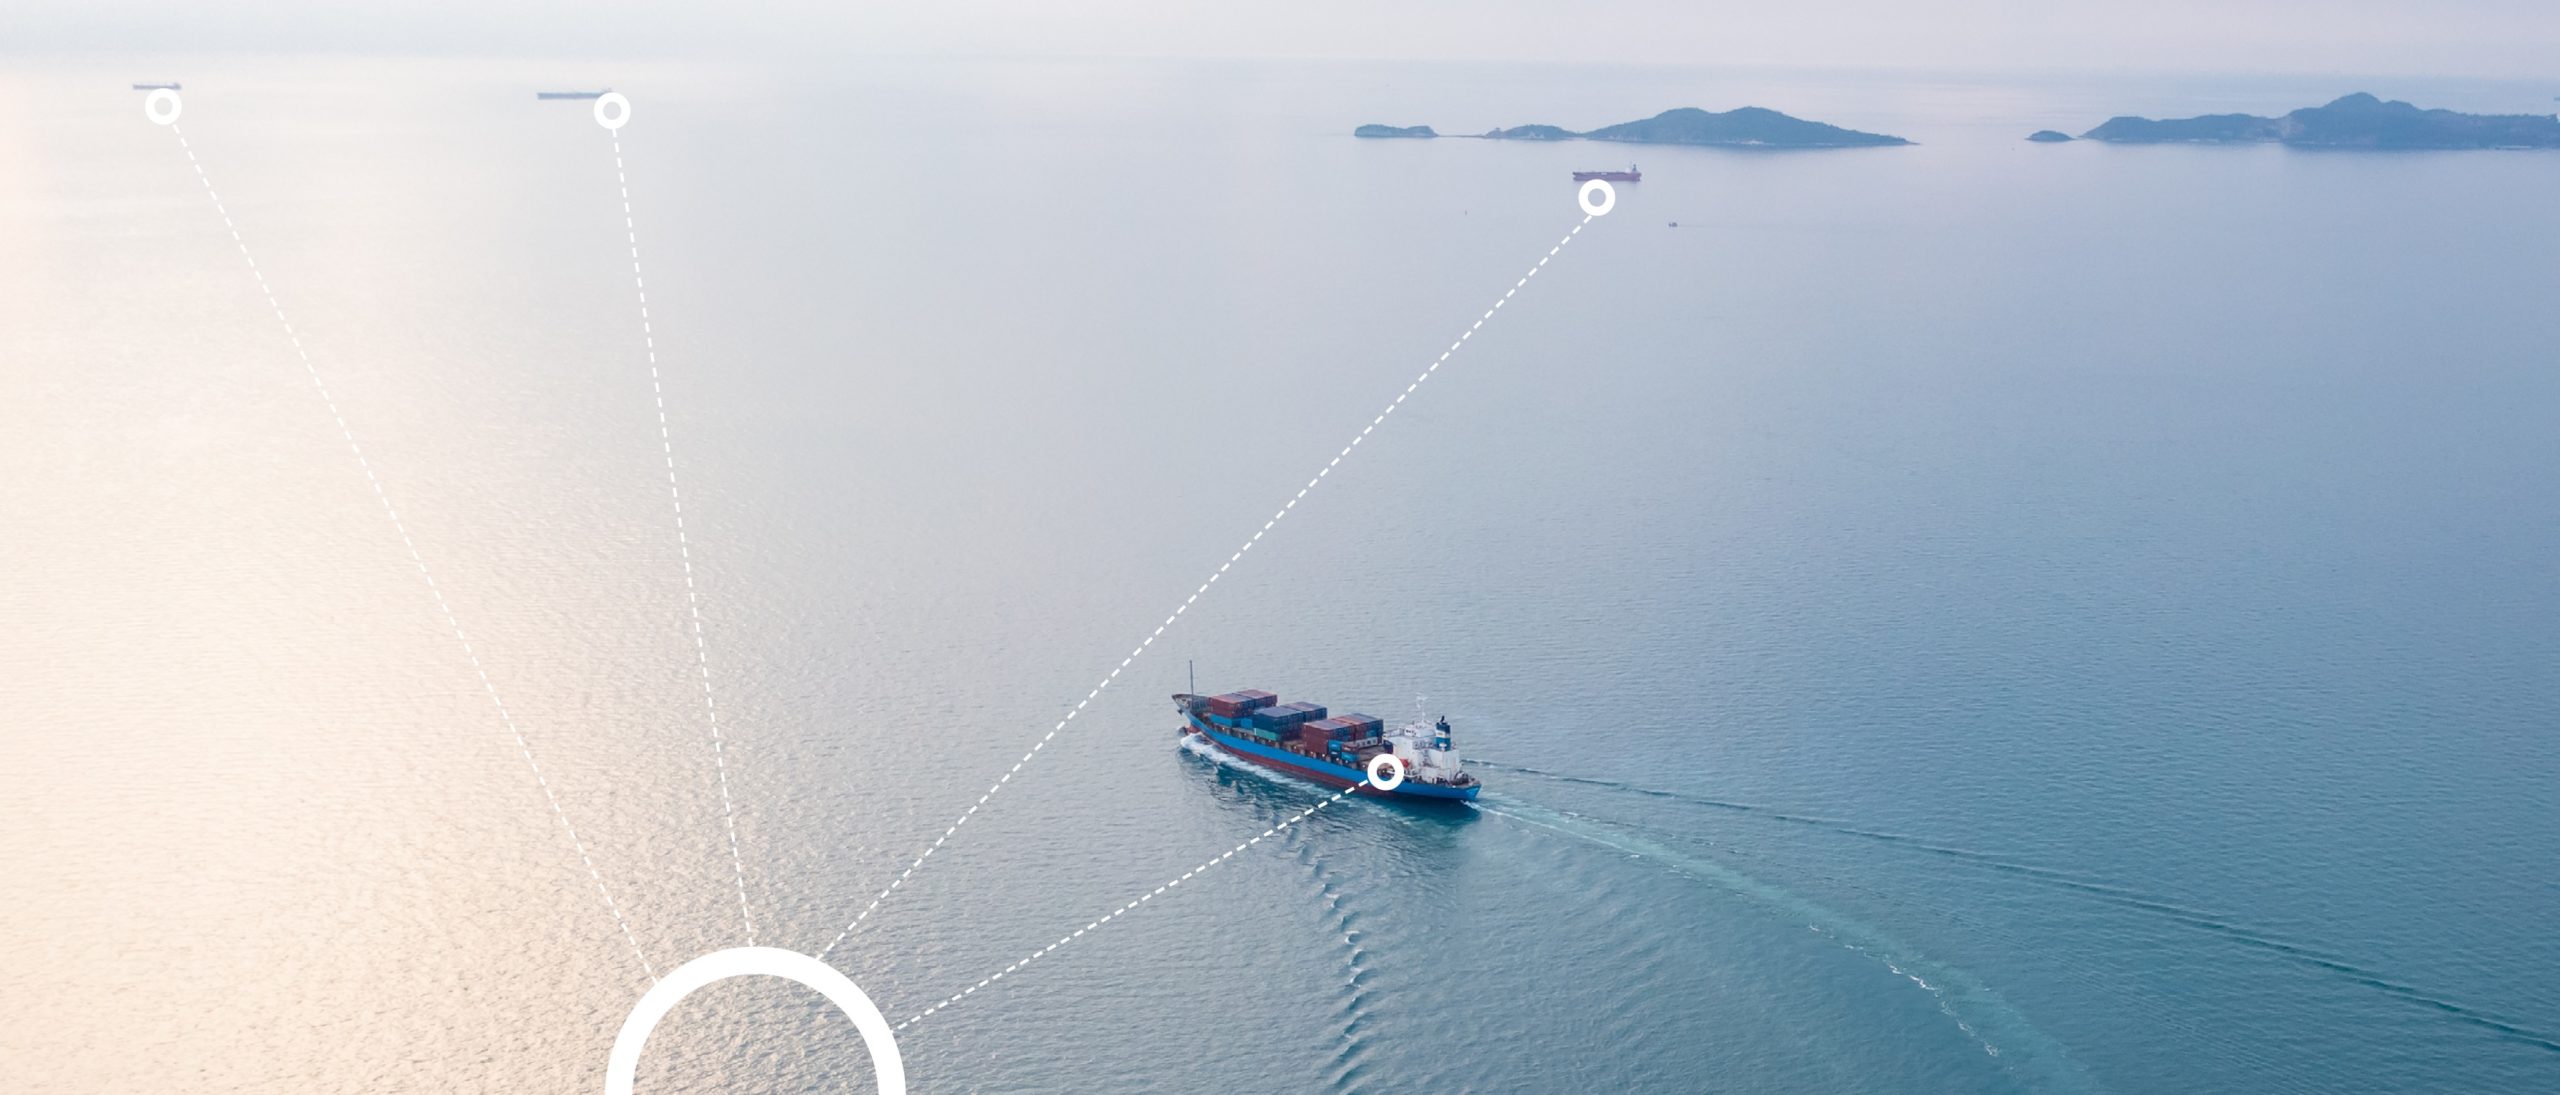 ABB and Wallenius Marine introduce pioneering digital offering driving efficiency gains for ships